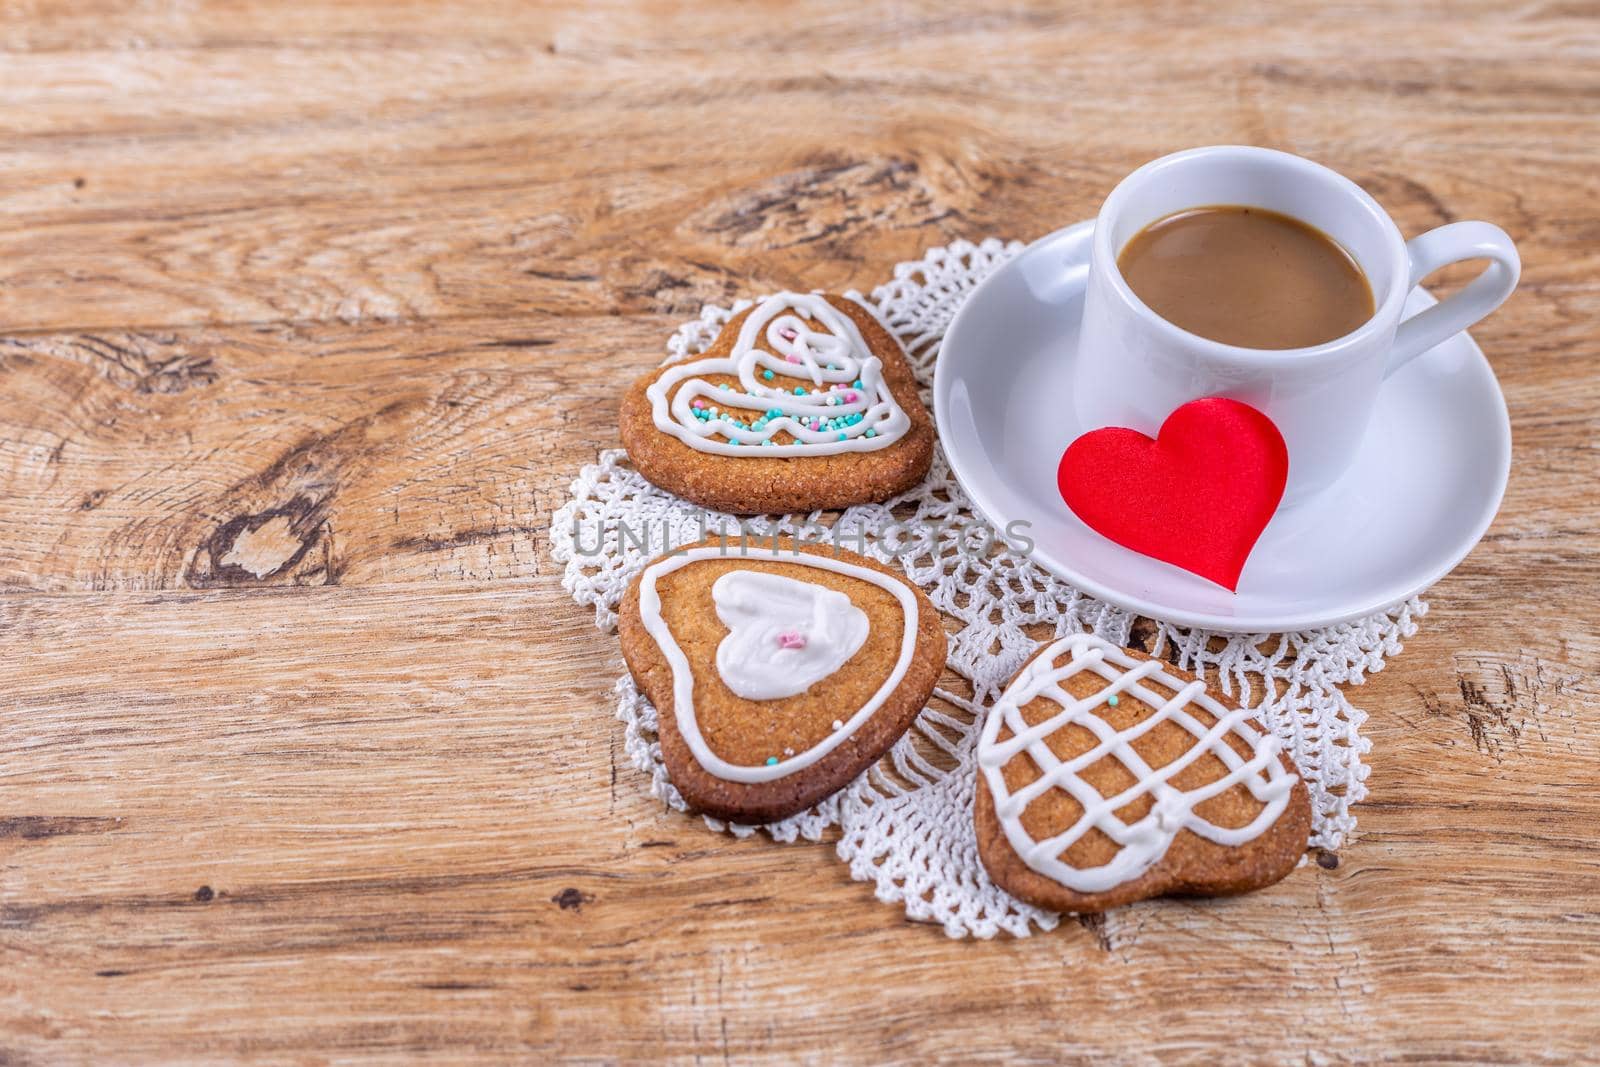 Homemade heart-shaped cookies, decorated with white icing with decorative sprinkles, and red hearts on a wooden table with a cup of coffee, top and side view.